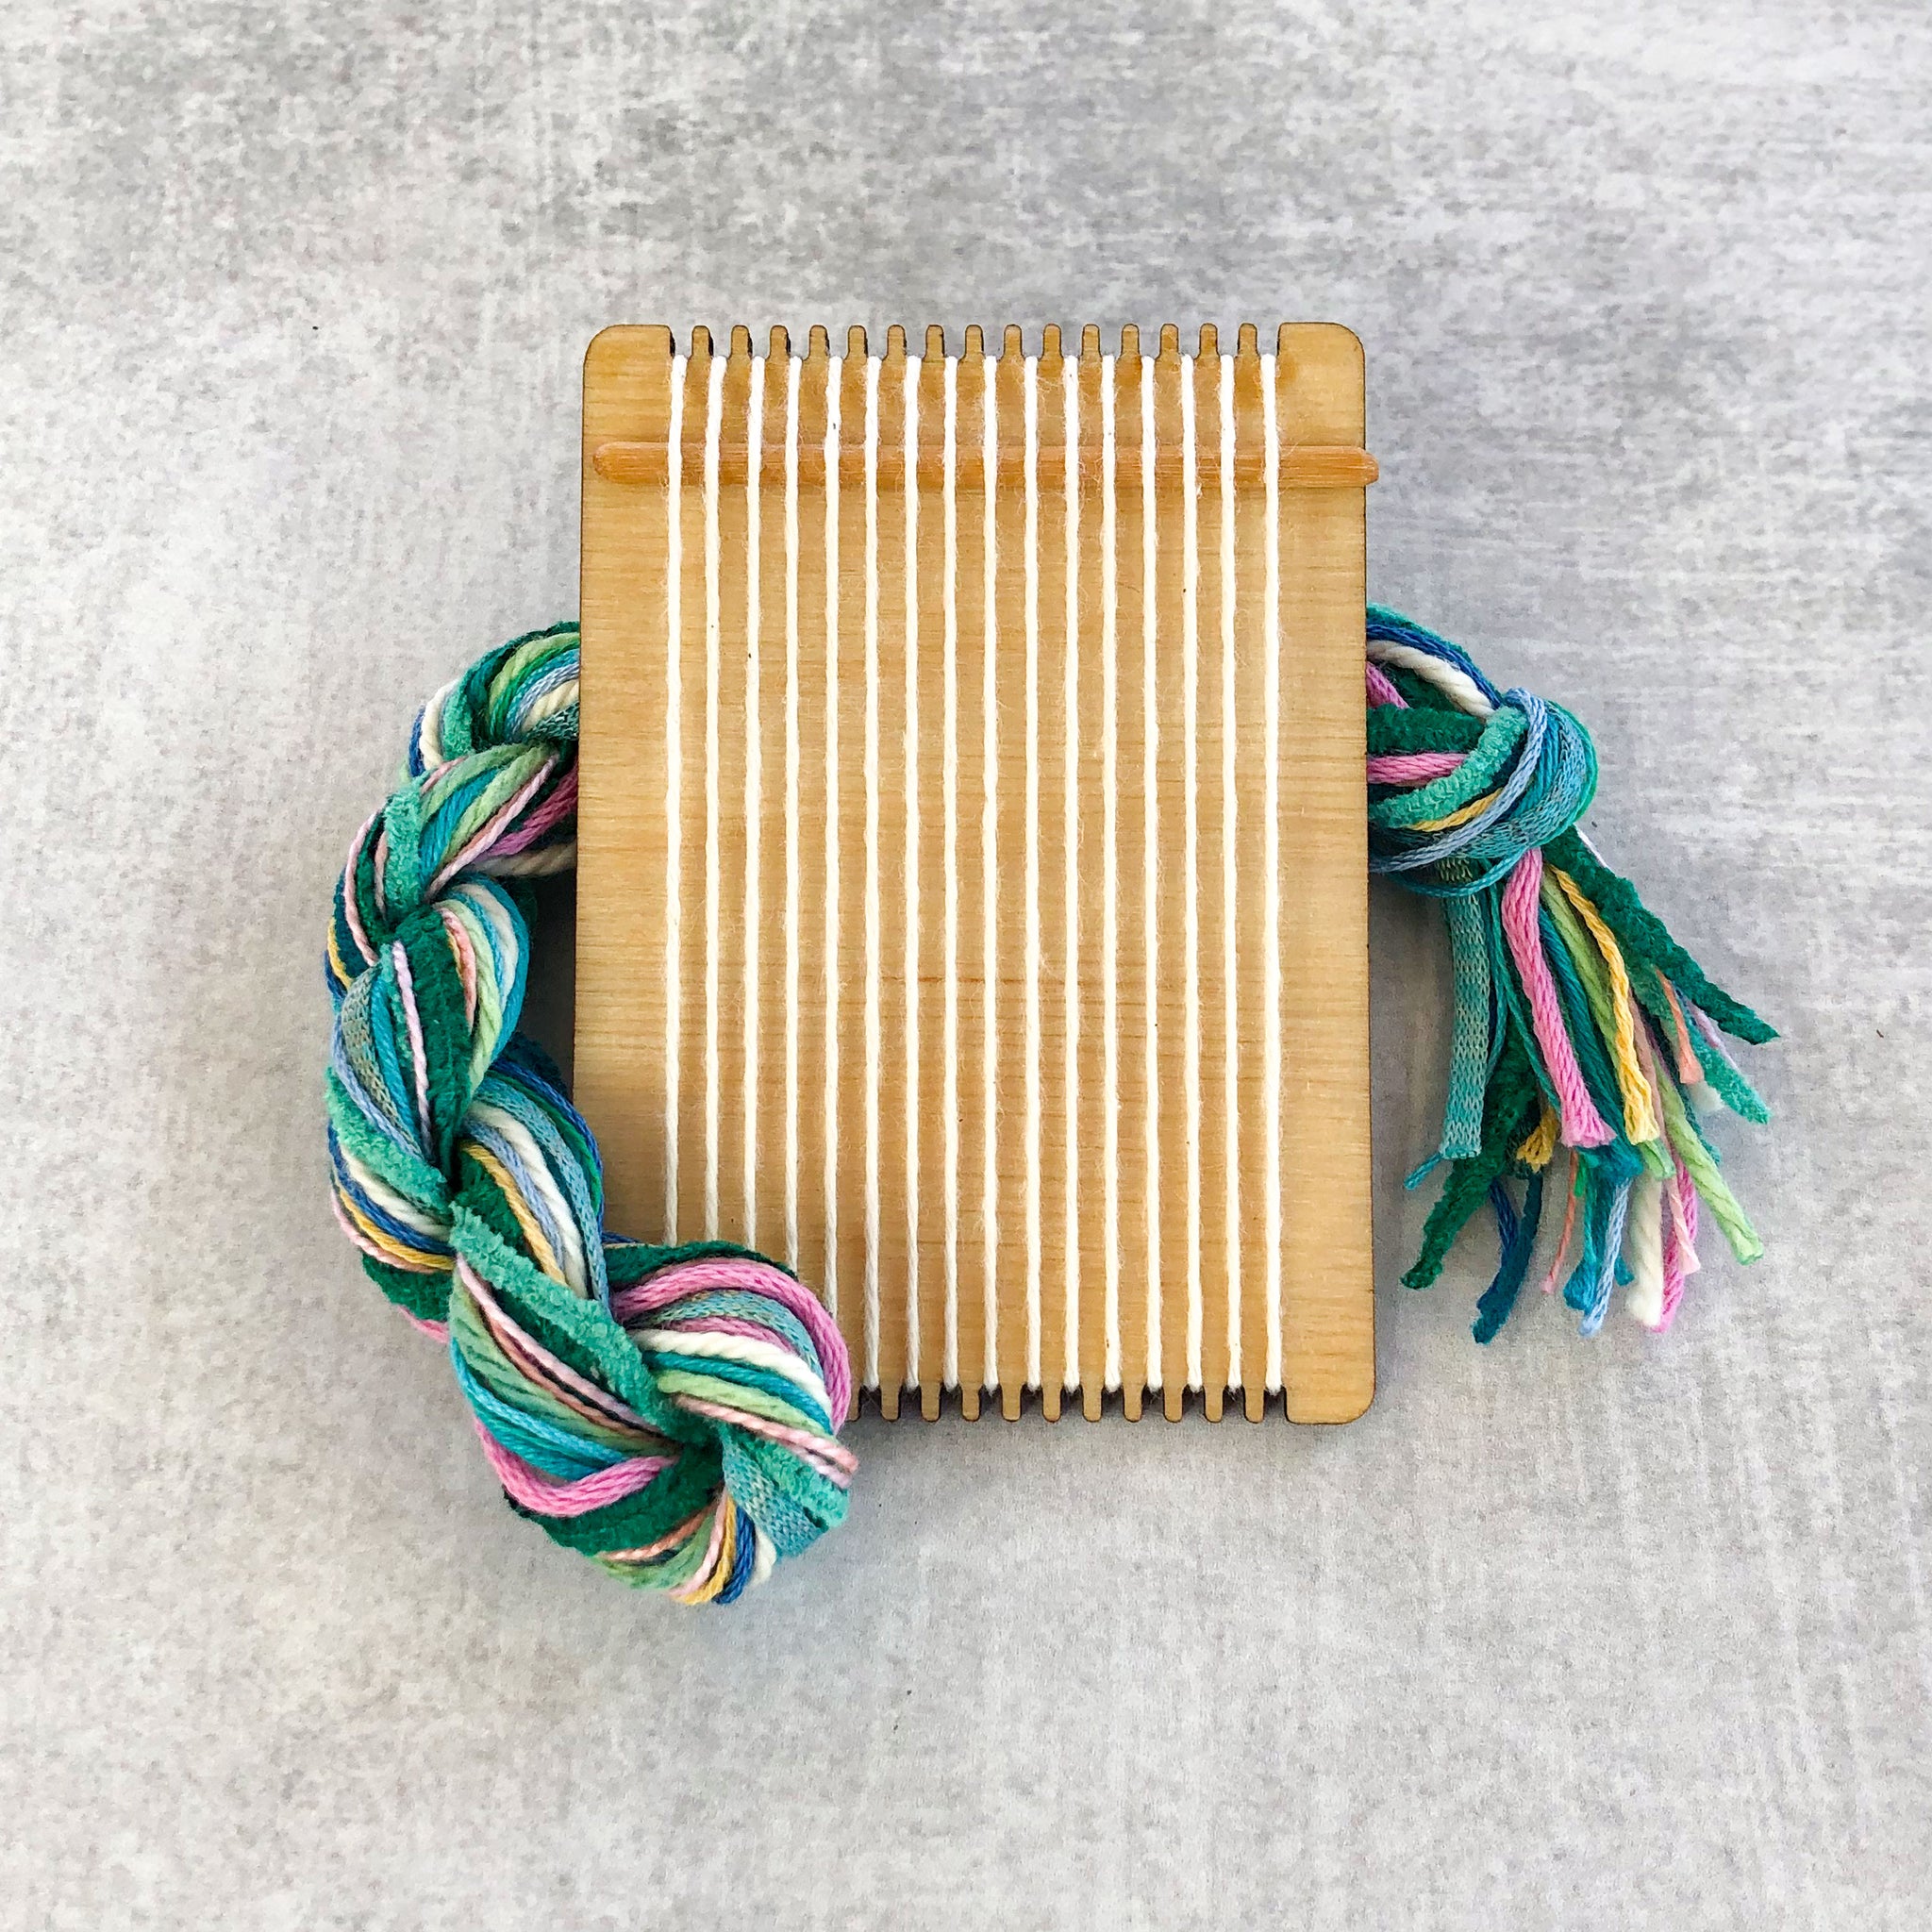 Tiny Wood Loom Kit- Cactus Colors - The Creativity Patch - Lucy Jennings